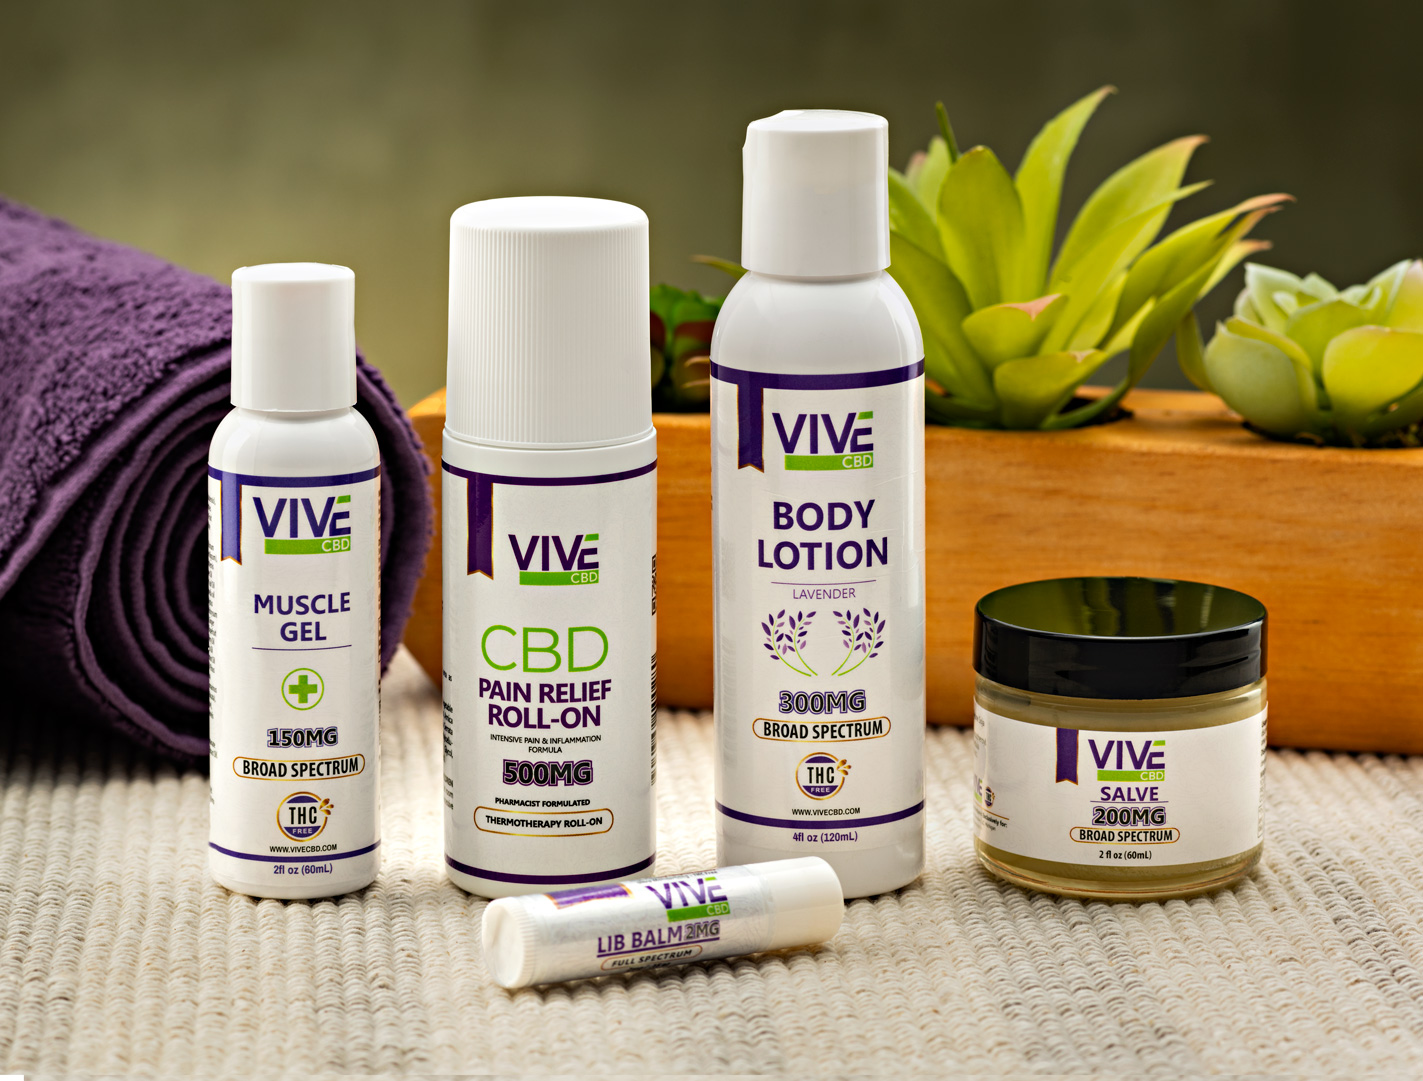 CBD oil product photography for website advertising